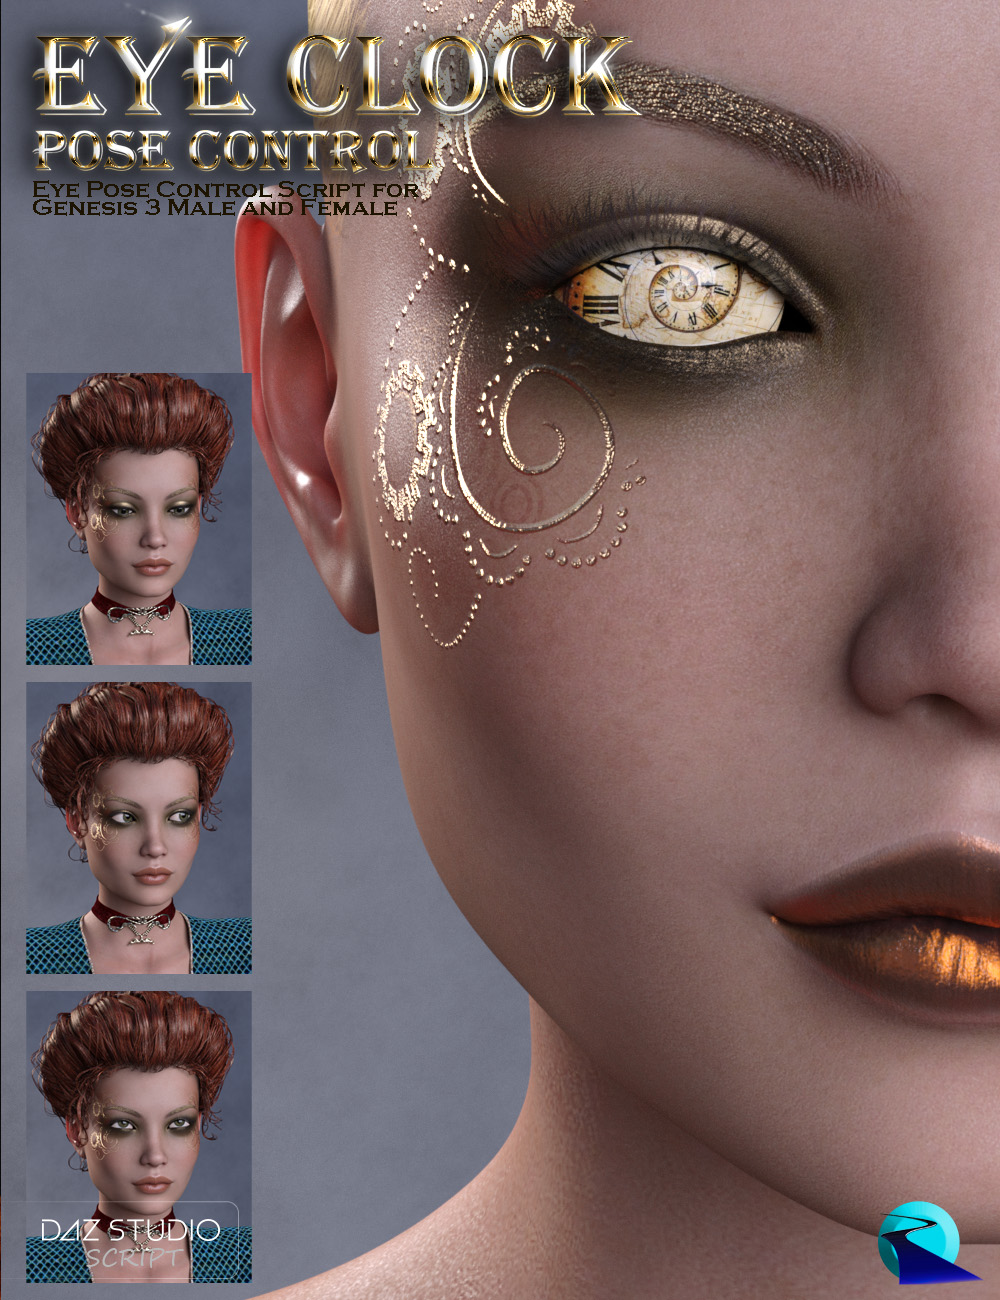 00 main eye clock pose control for genesis 3 males and females daz3d dHA2Vf15